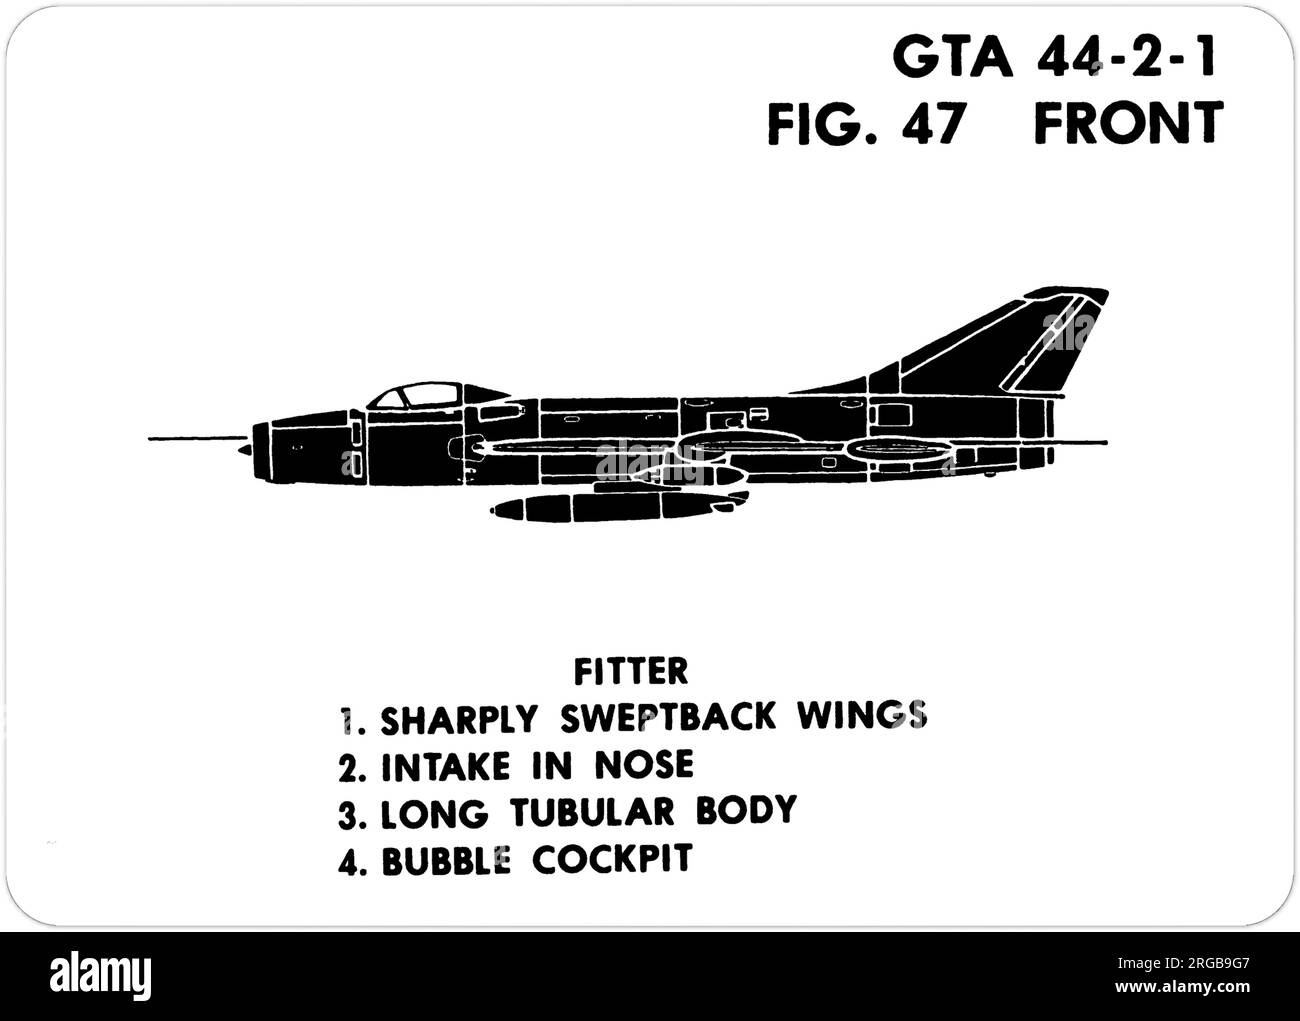 Sukhoi Su-7B (NATO codename: Fitter). This is one of the series of Graphics Training Aids (GTA) used by the United States Army to train their personnel to recognize friendly and hostile aircraft. This particular set, GTA 44-2-1, was issued in July1977. The set features aircraft from: Canada, Italy, United Kingdom, United States, and the USSR. Stock Photo